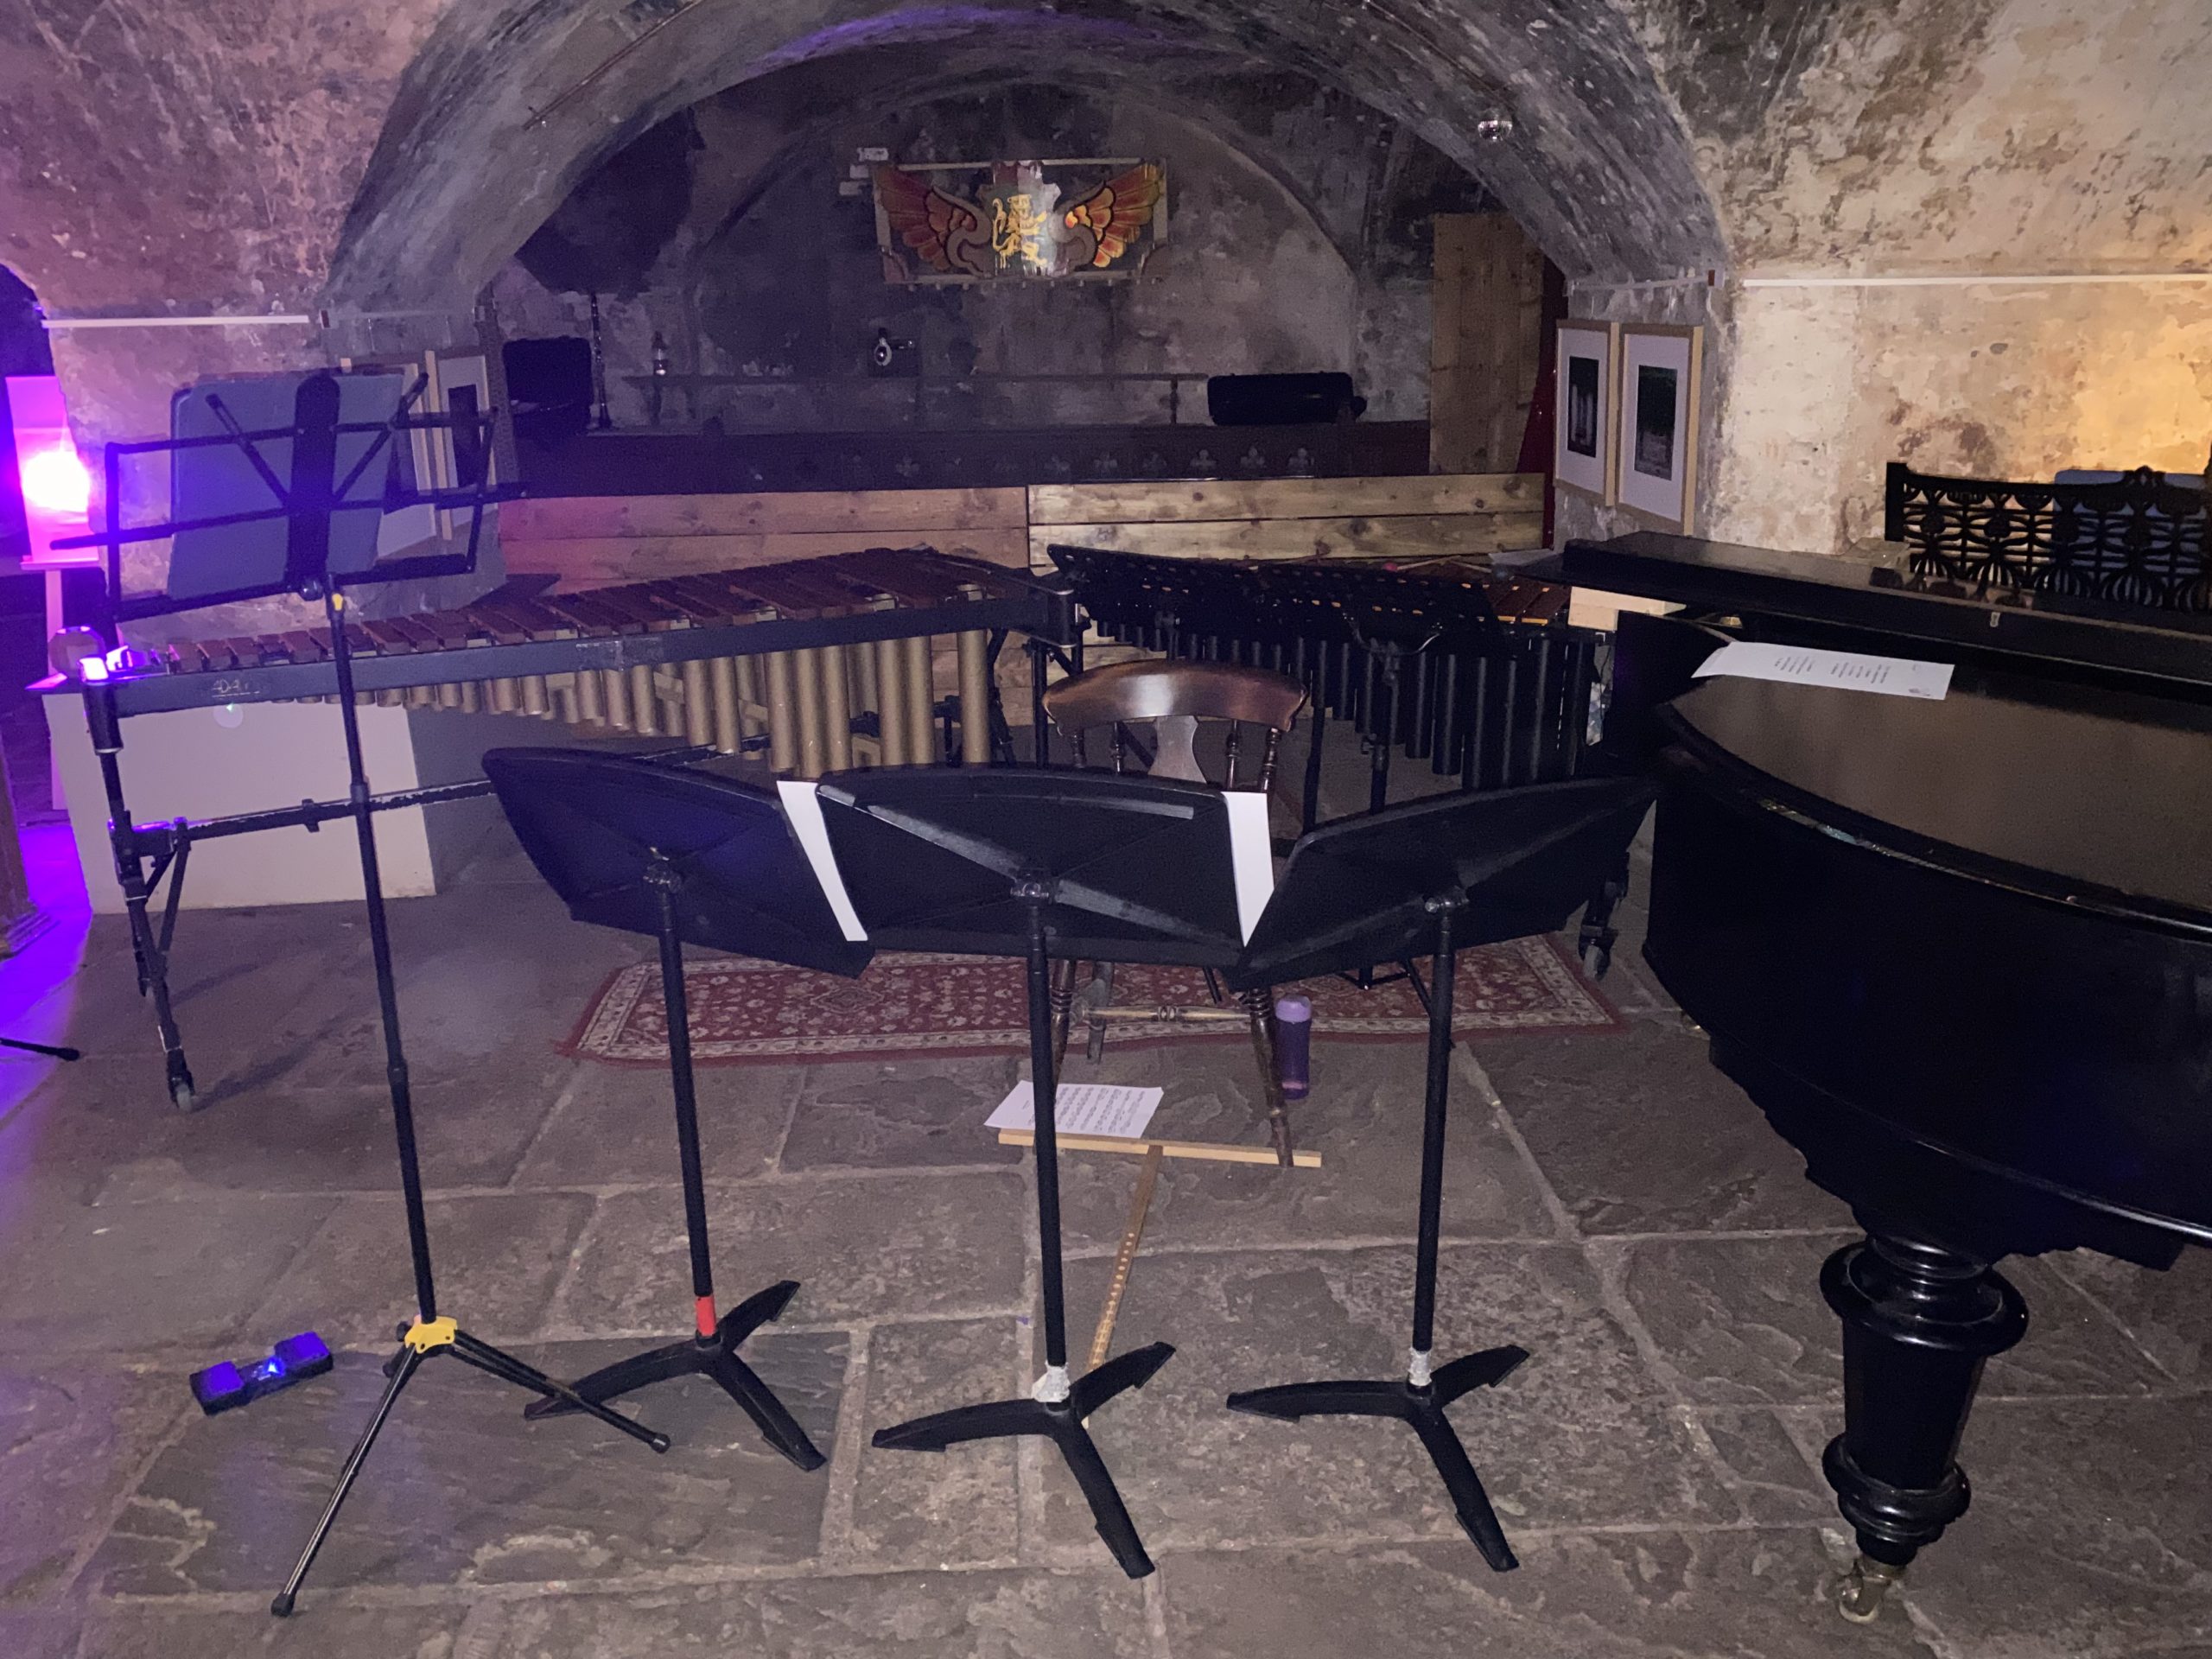 Instruments and music stands at the Crypt in The Mount Without, Bristol